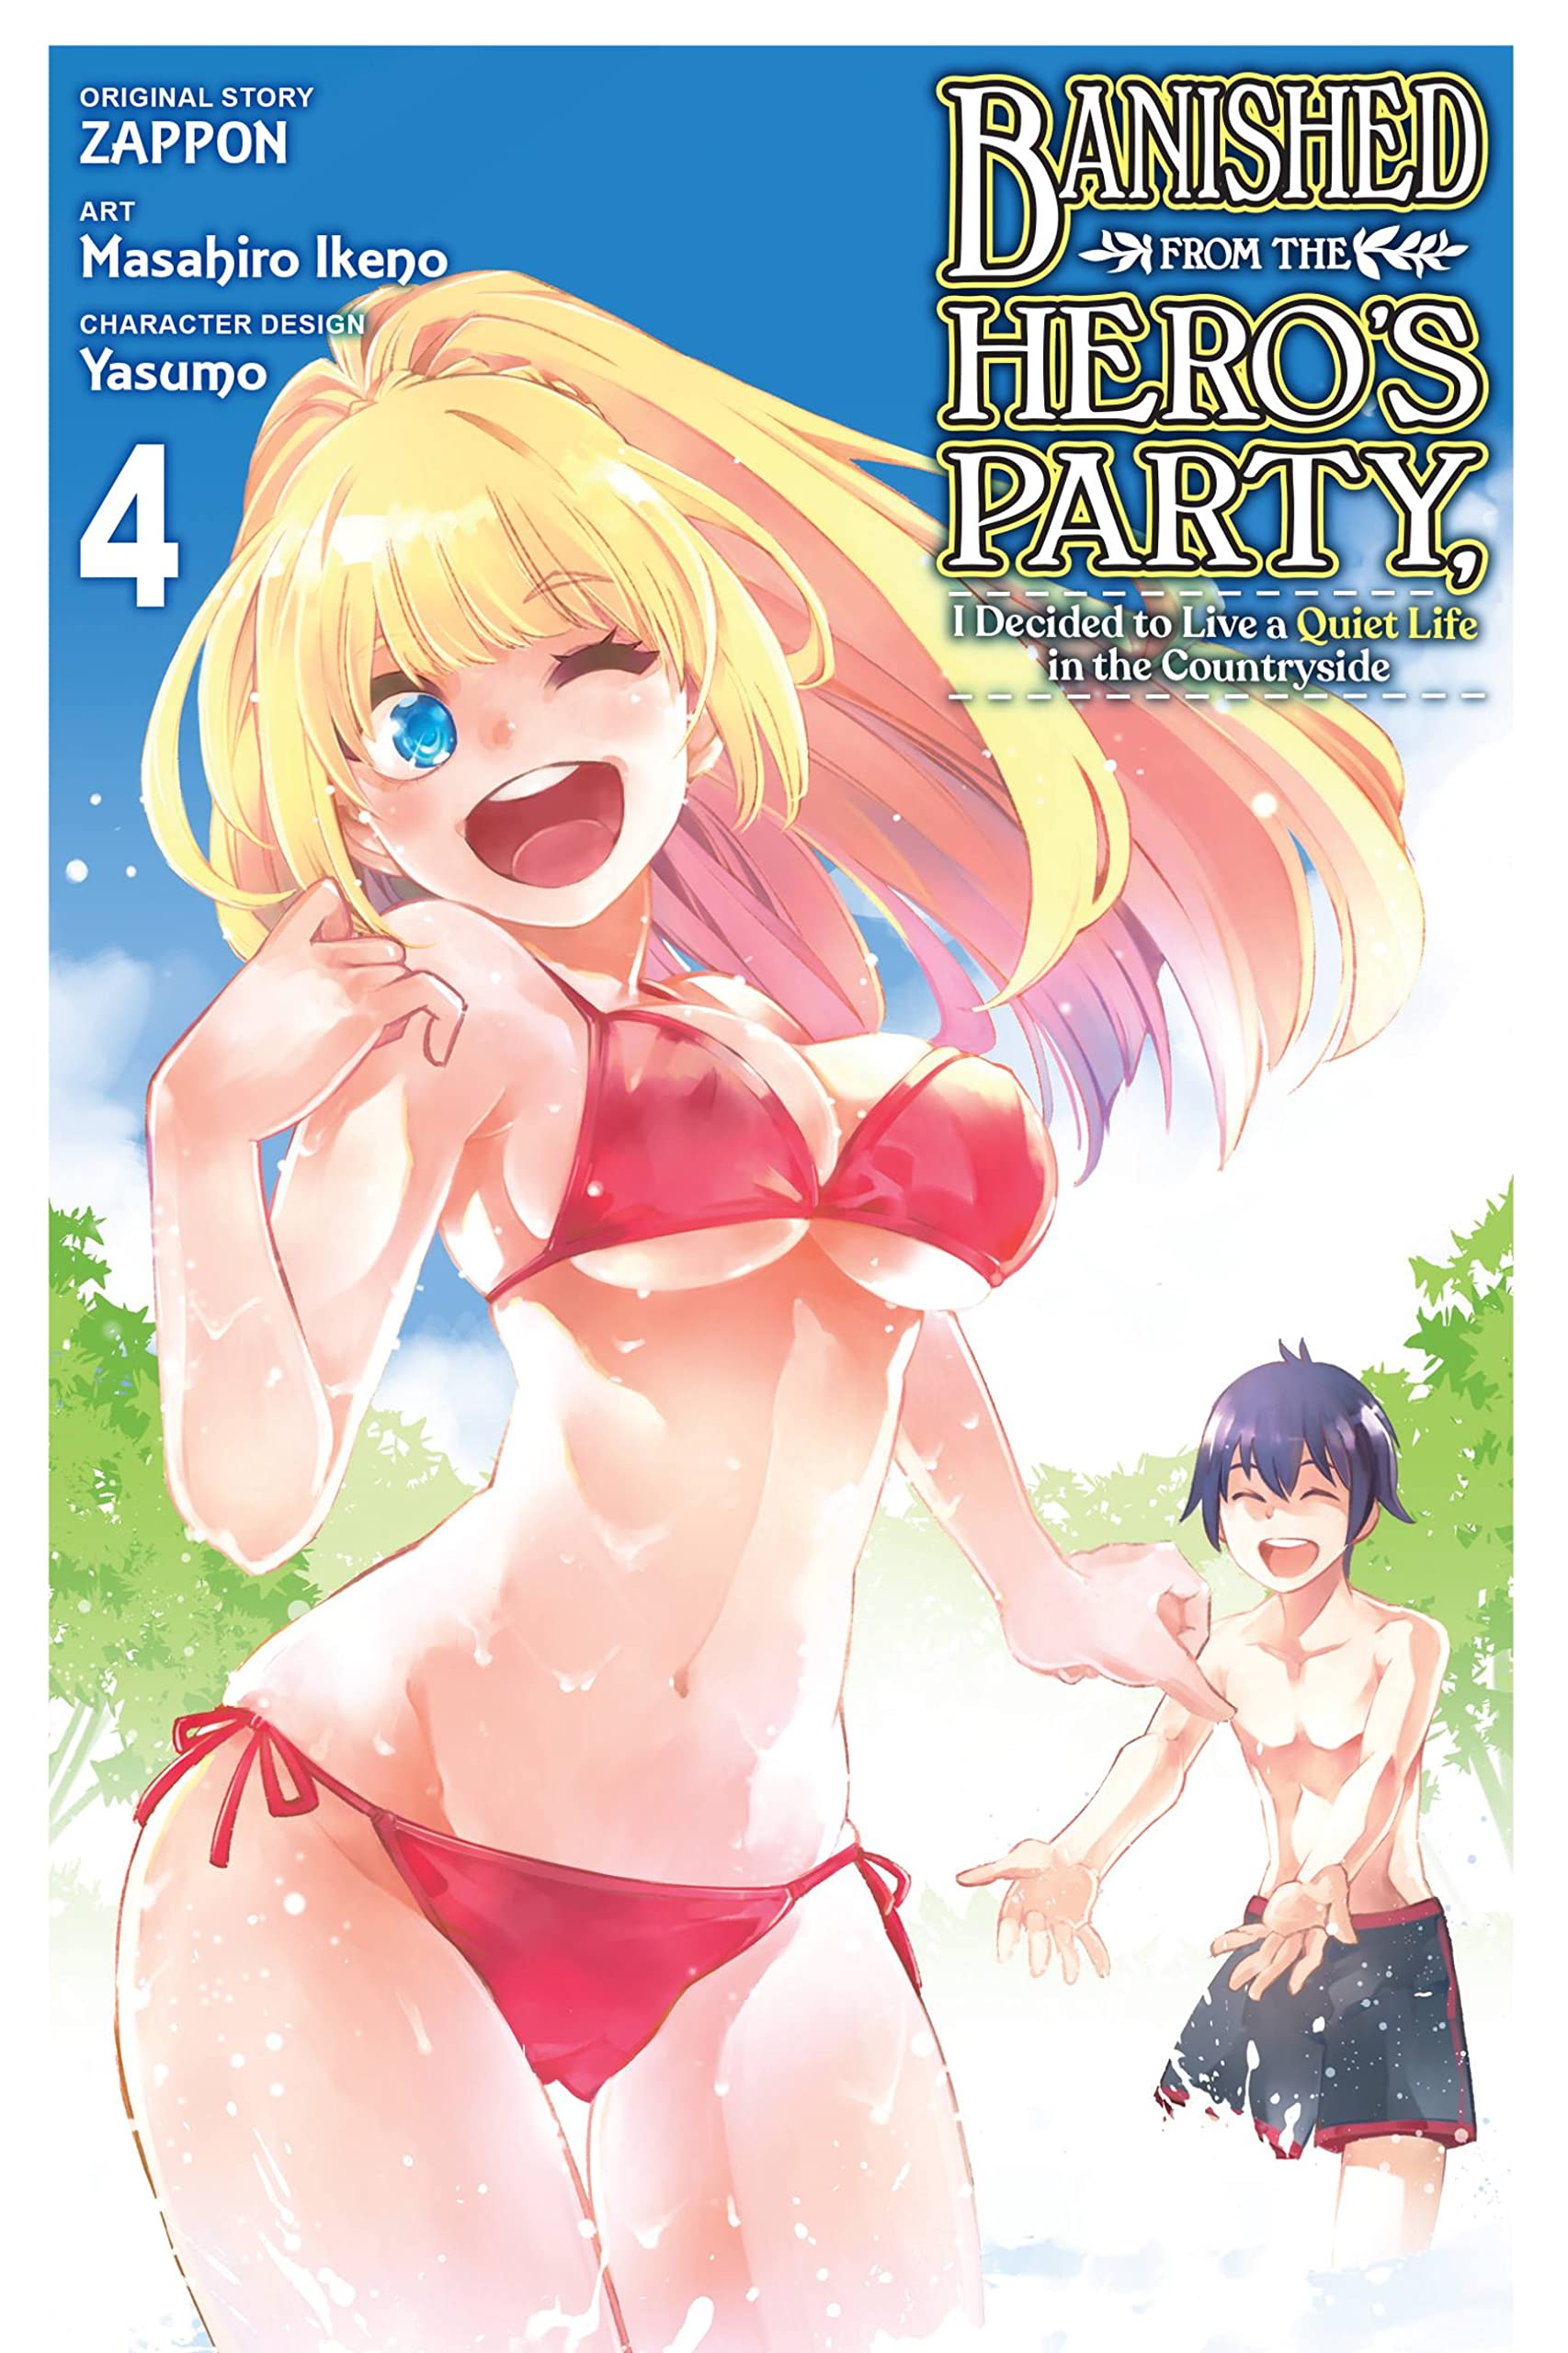 Banished from the Hero's Party, I Decided to Live a Quiet Life in the Countryside (Manga) Vol. 04